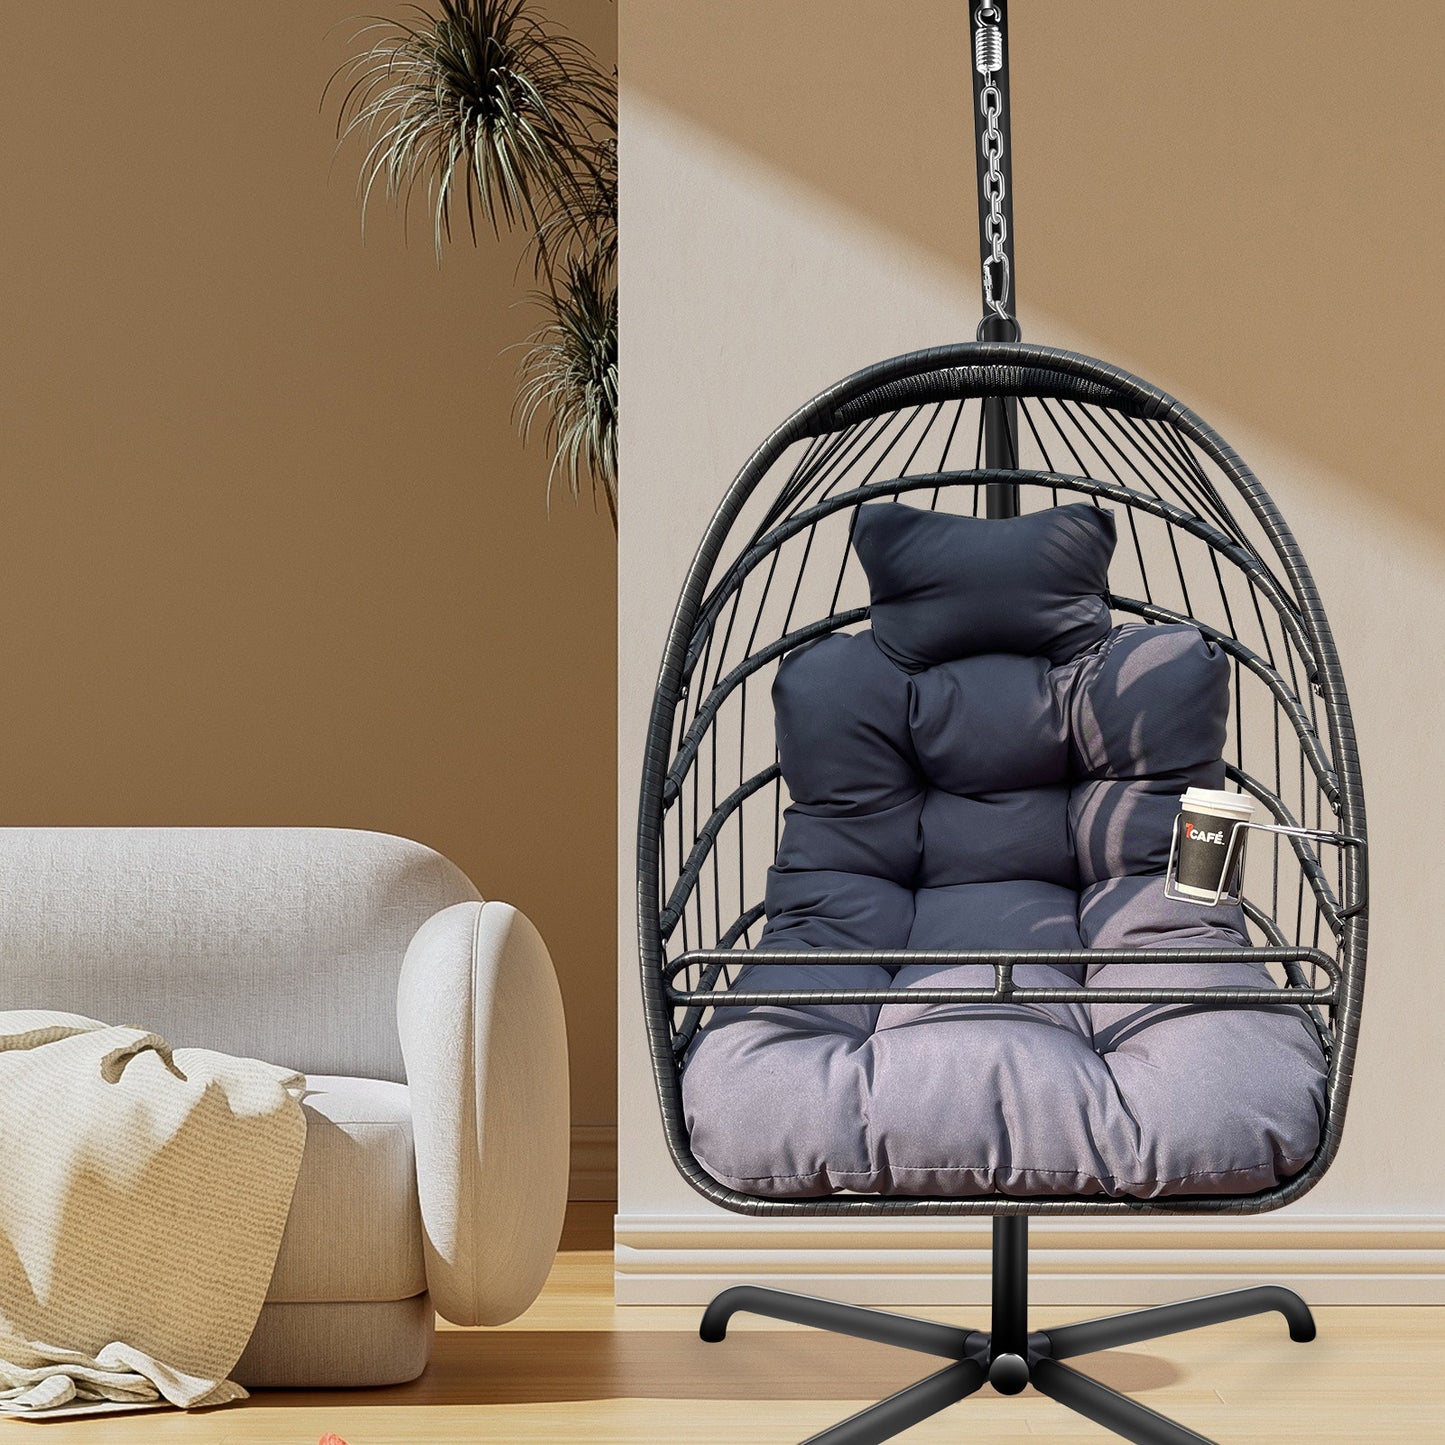 Swing Egg Chair with Stand Indoor/Outdoor